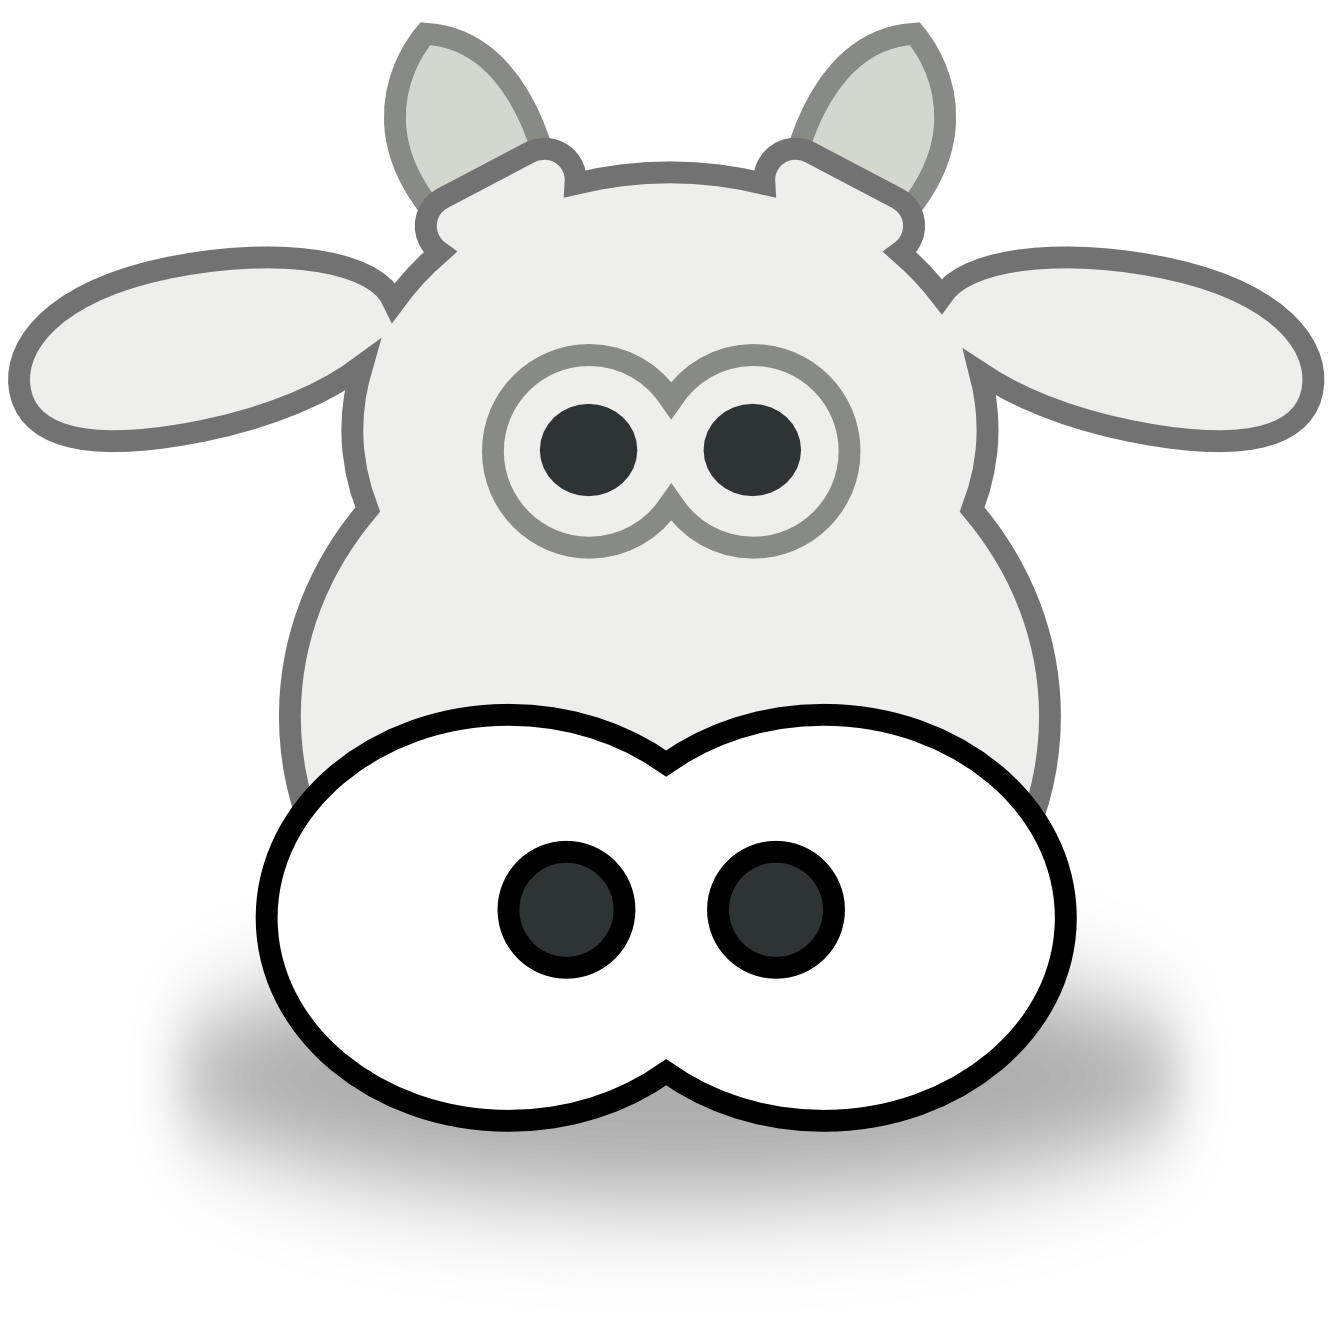 Face panda free images. Indian clipart cow